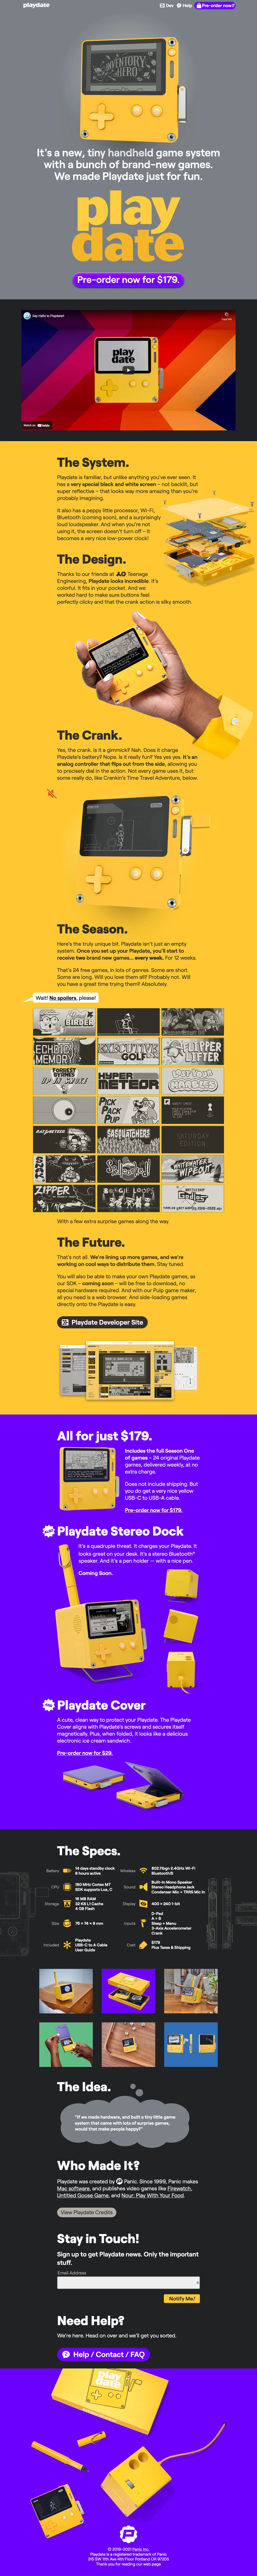 Playdate Landing Page Example: It’s yellow. It fits in your pocket. There’s a crank. It comes with 24 free games to get you started. Say hi to Playdate from Panic.